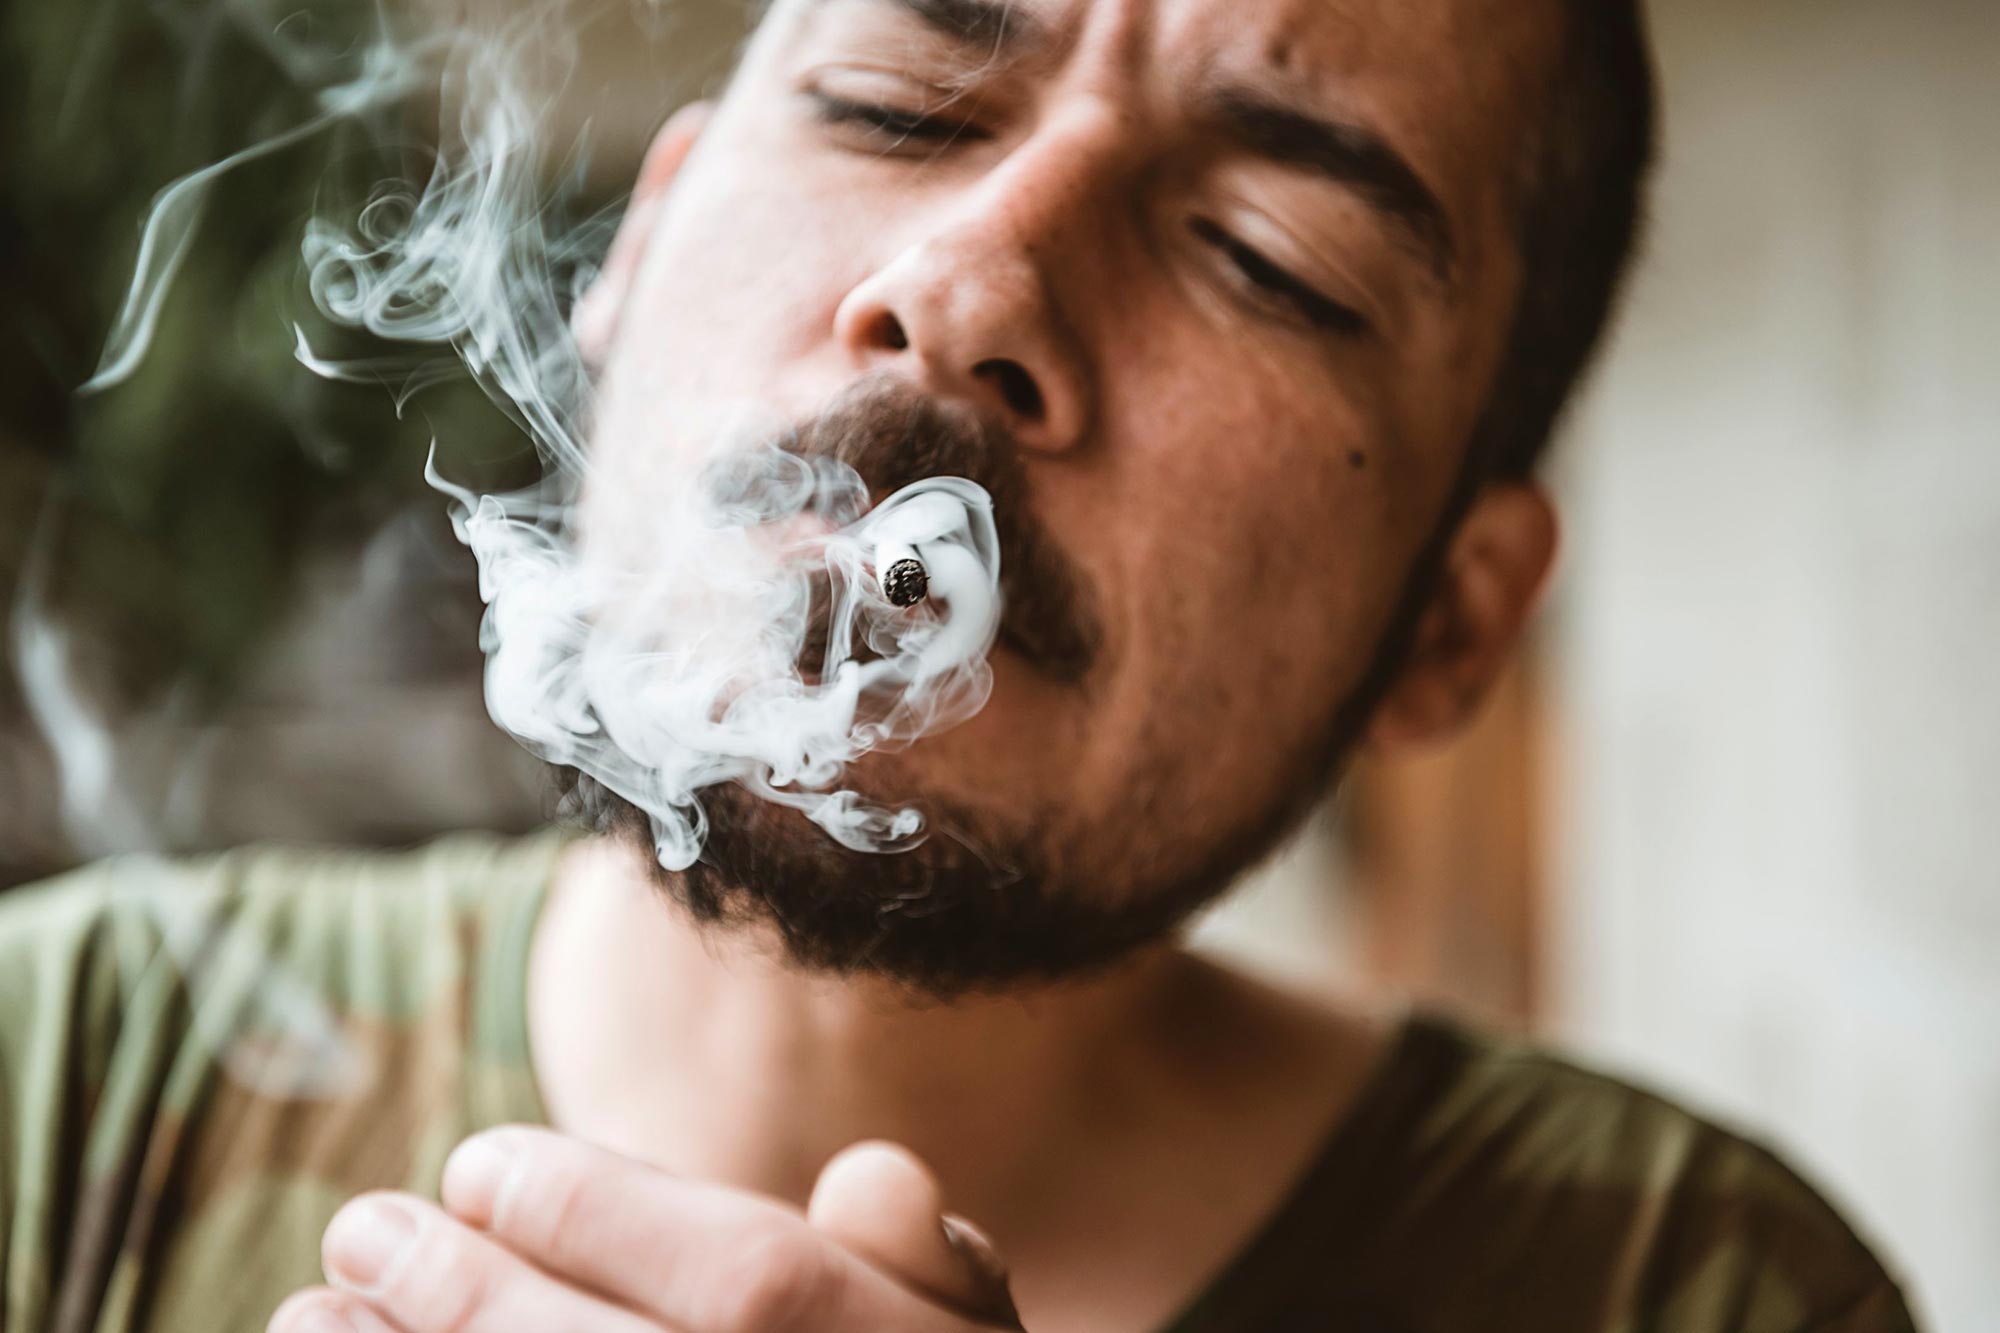 Smoking marijuana can be worse for your lungs than smoking cigarettes